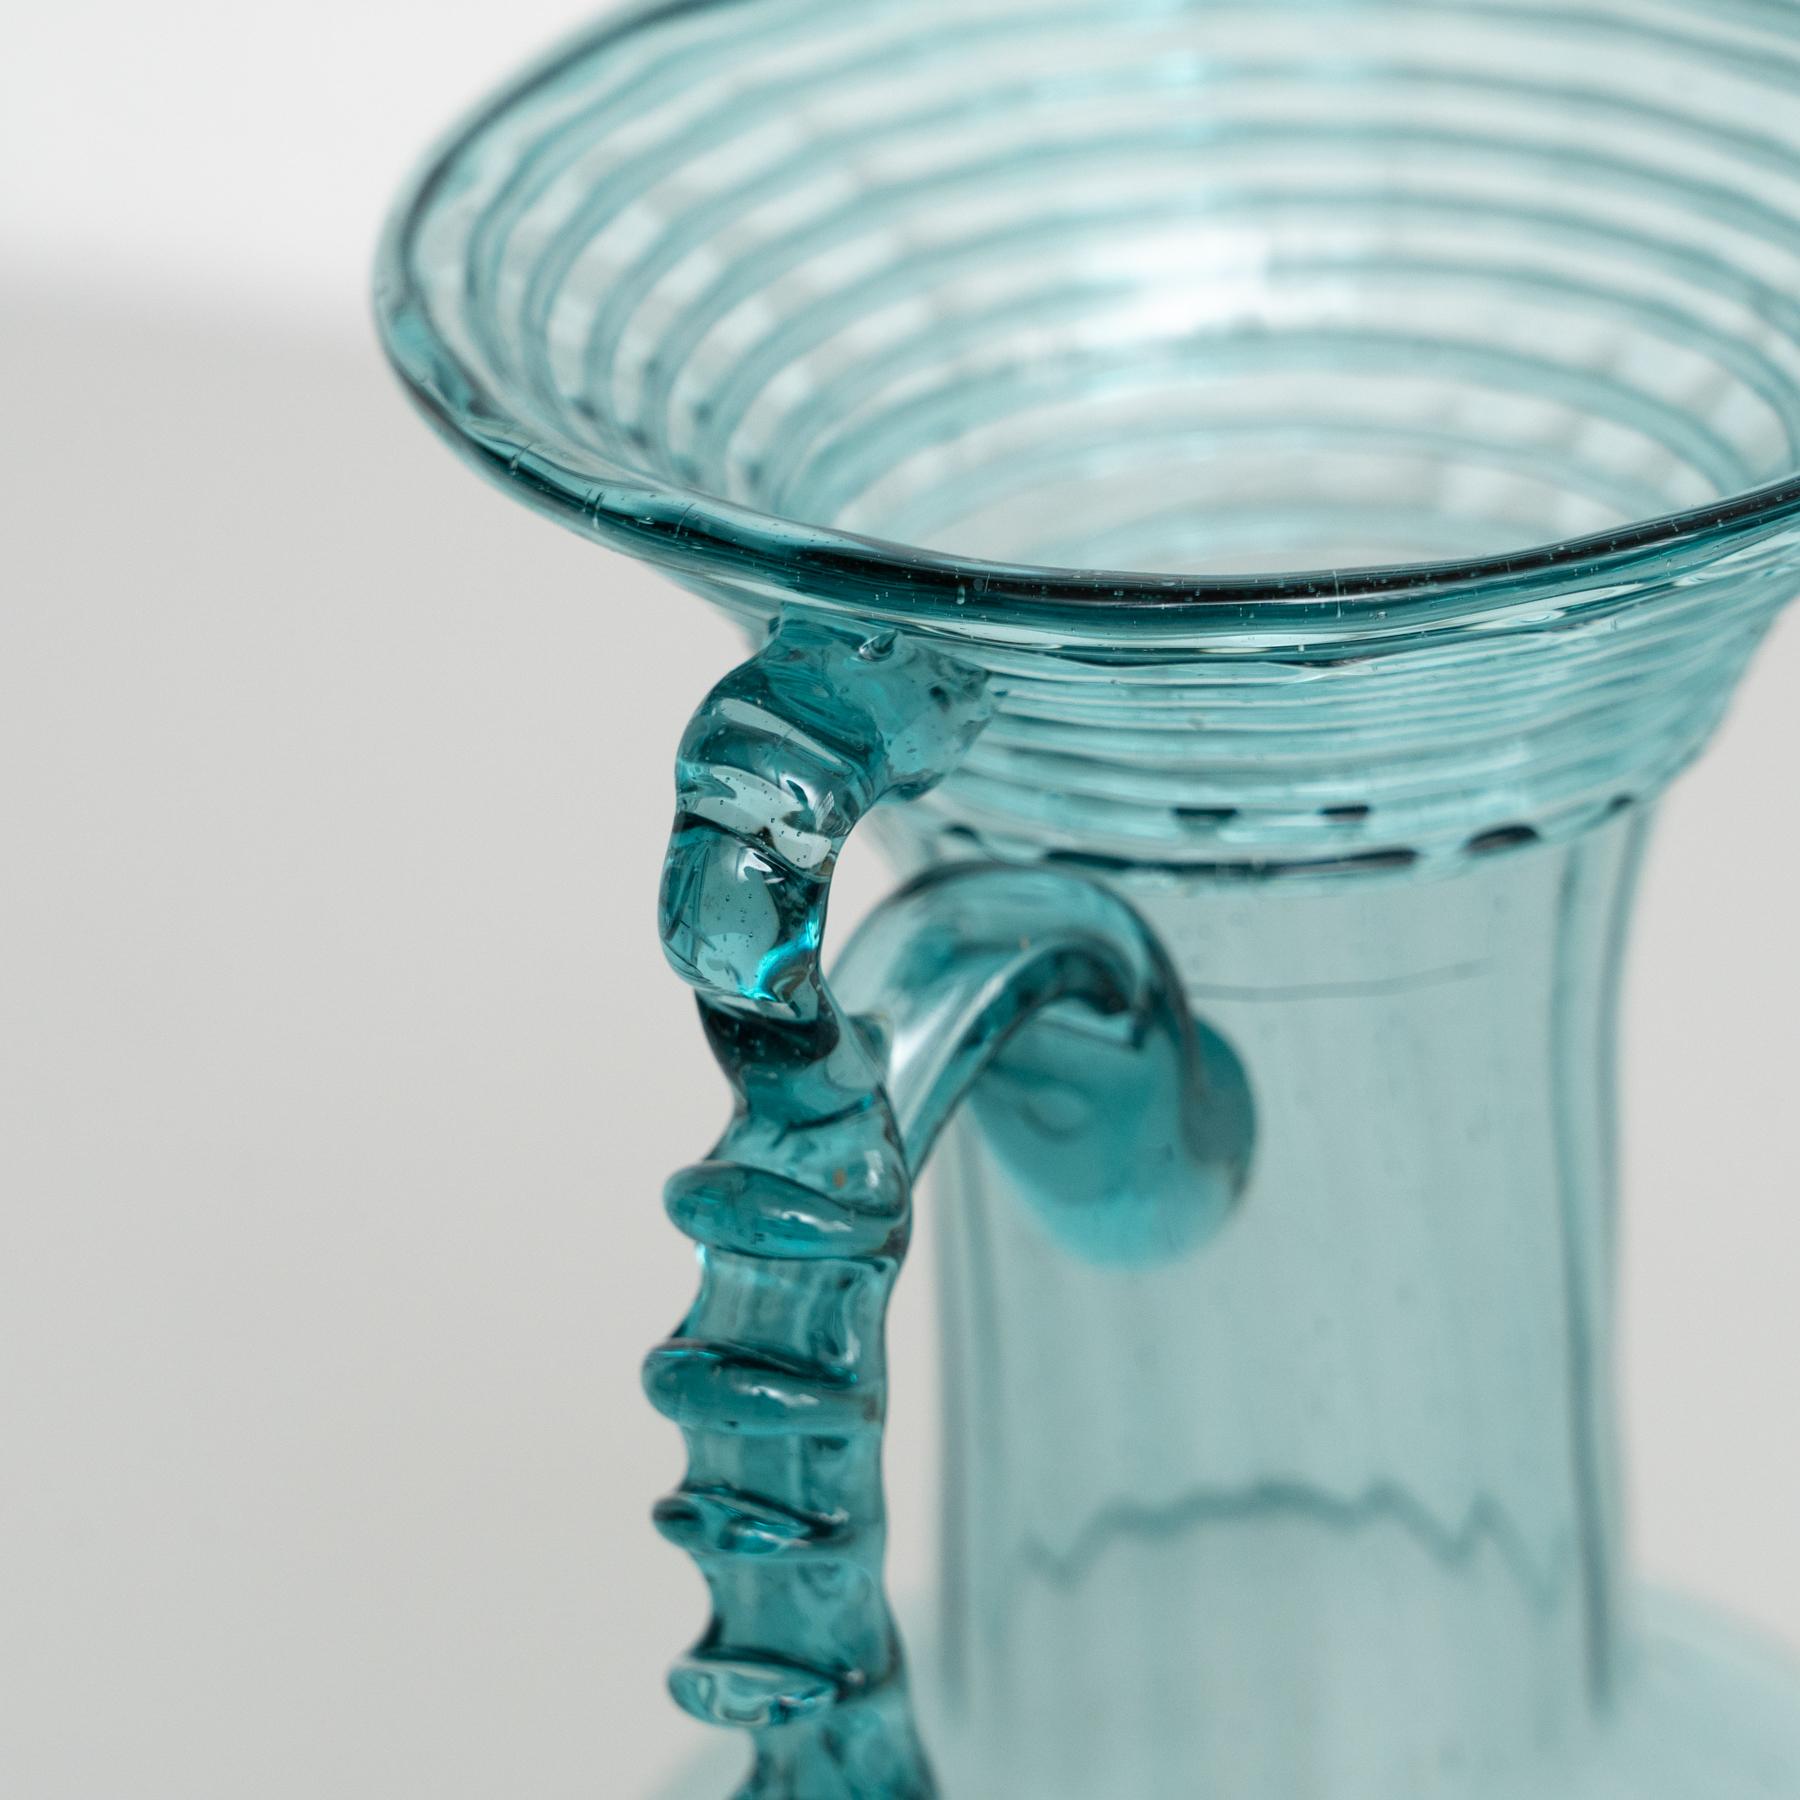 Exceptional Blown Glass Vase - Early XXth Century - Spanish Craftsmanship For Sale 8